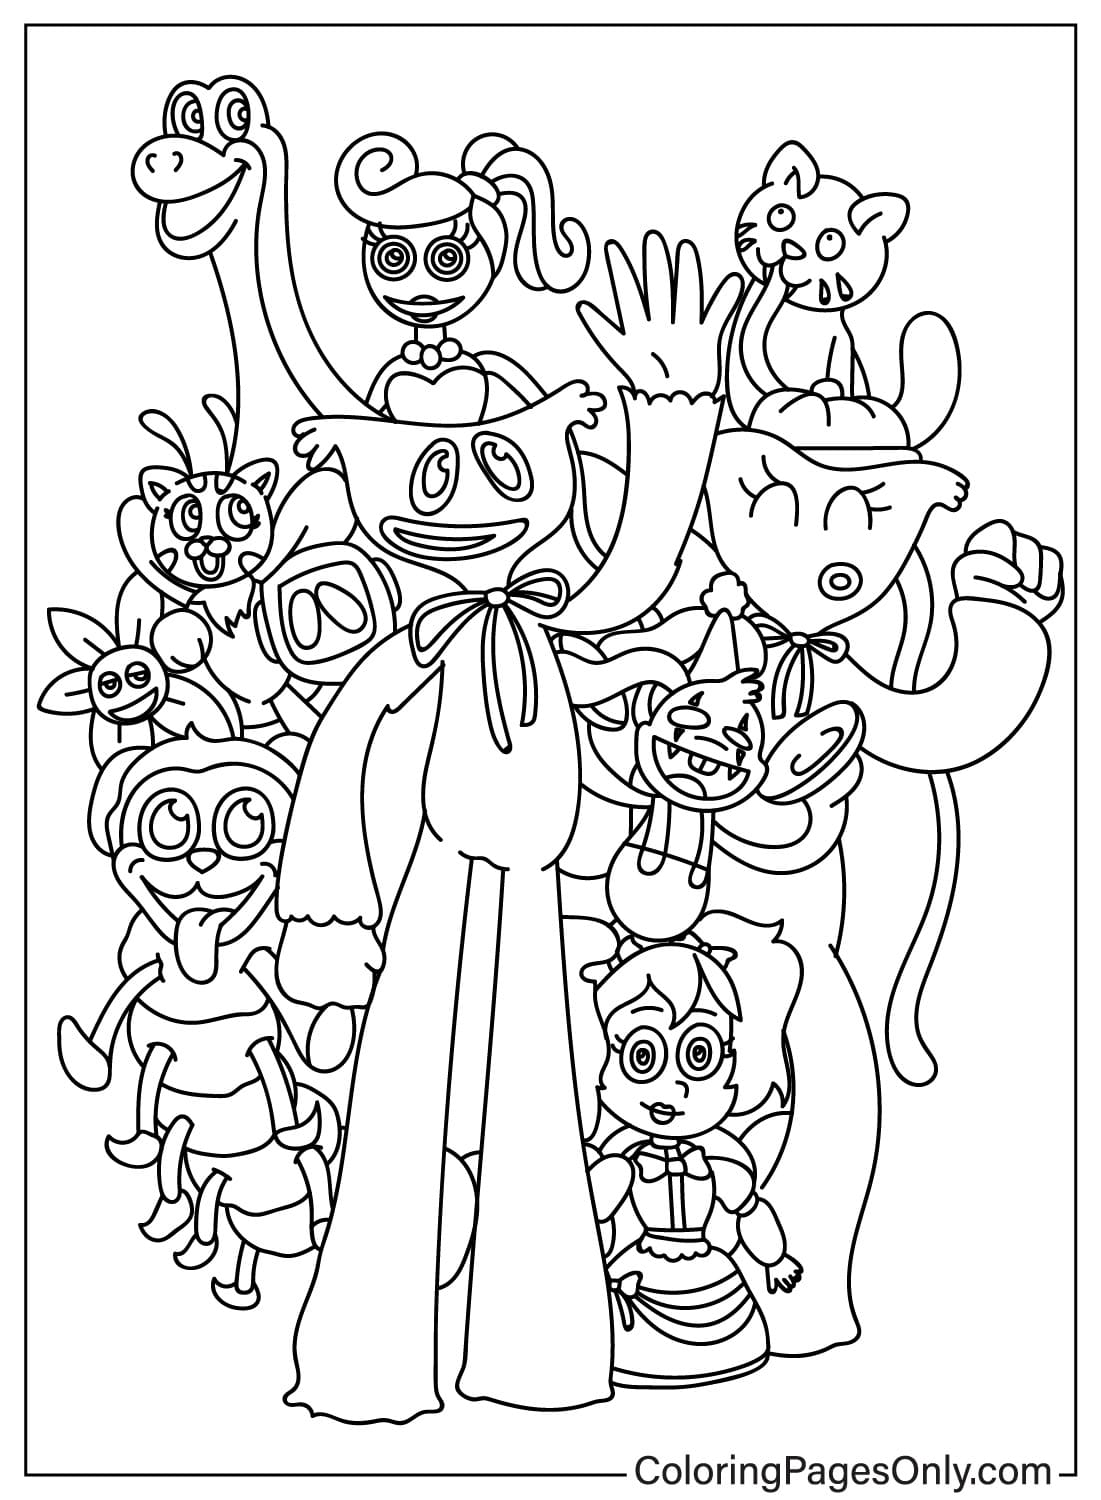 Poppy Playtime Coloring Page Free from Poppy Playtime